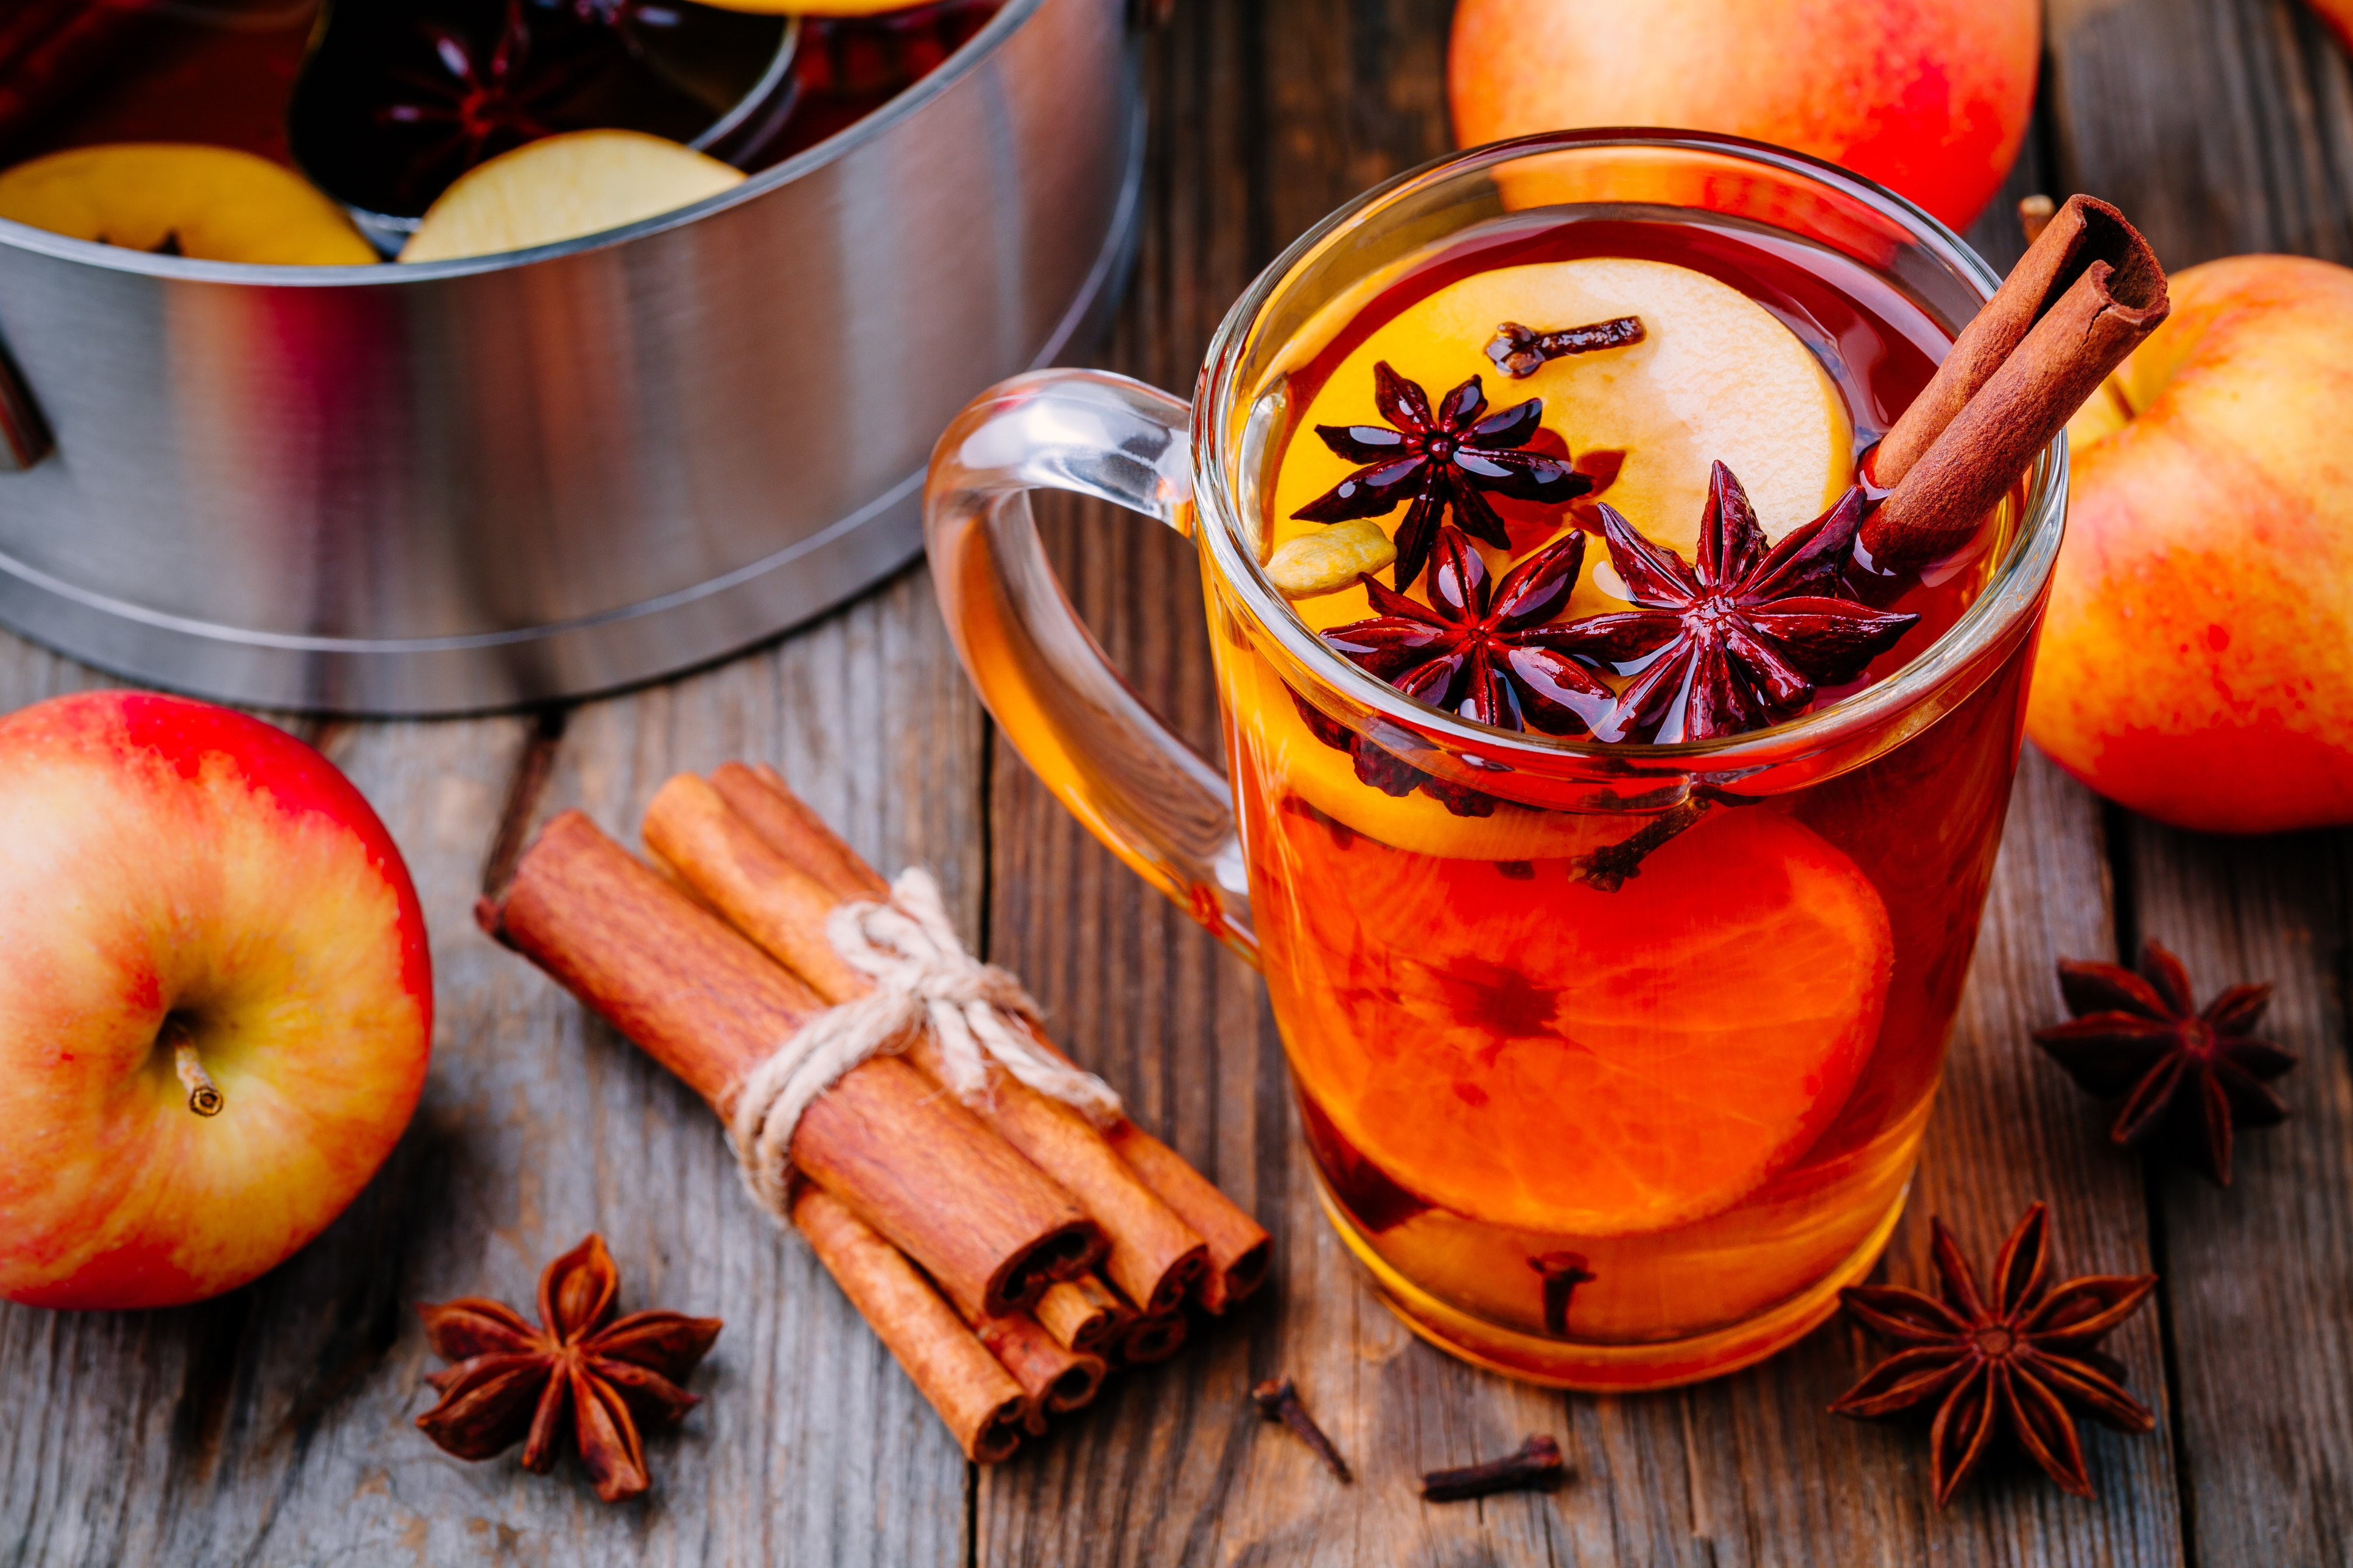  Hot mulled apple cider with cinnamon sticks, cloves and anise on wooden background